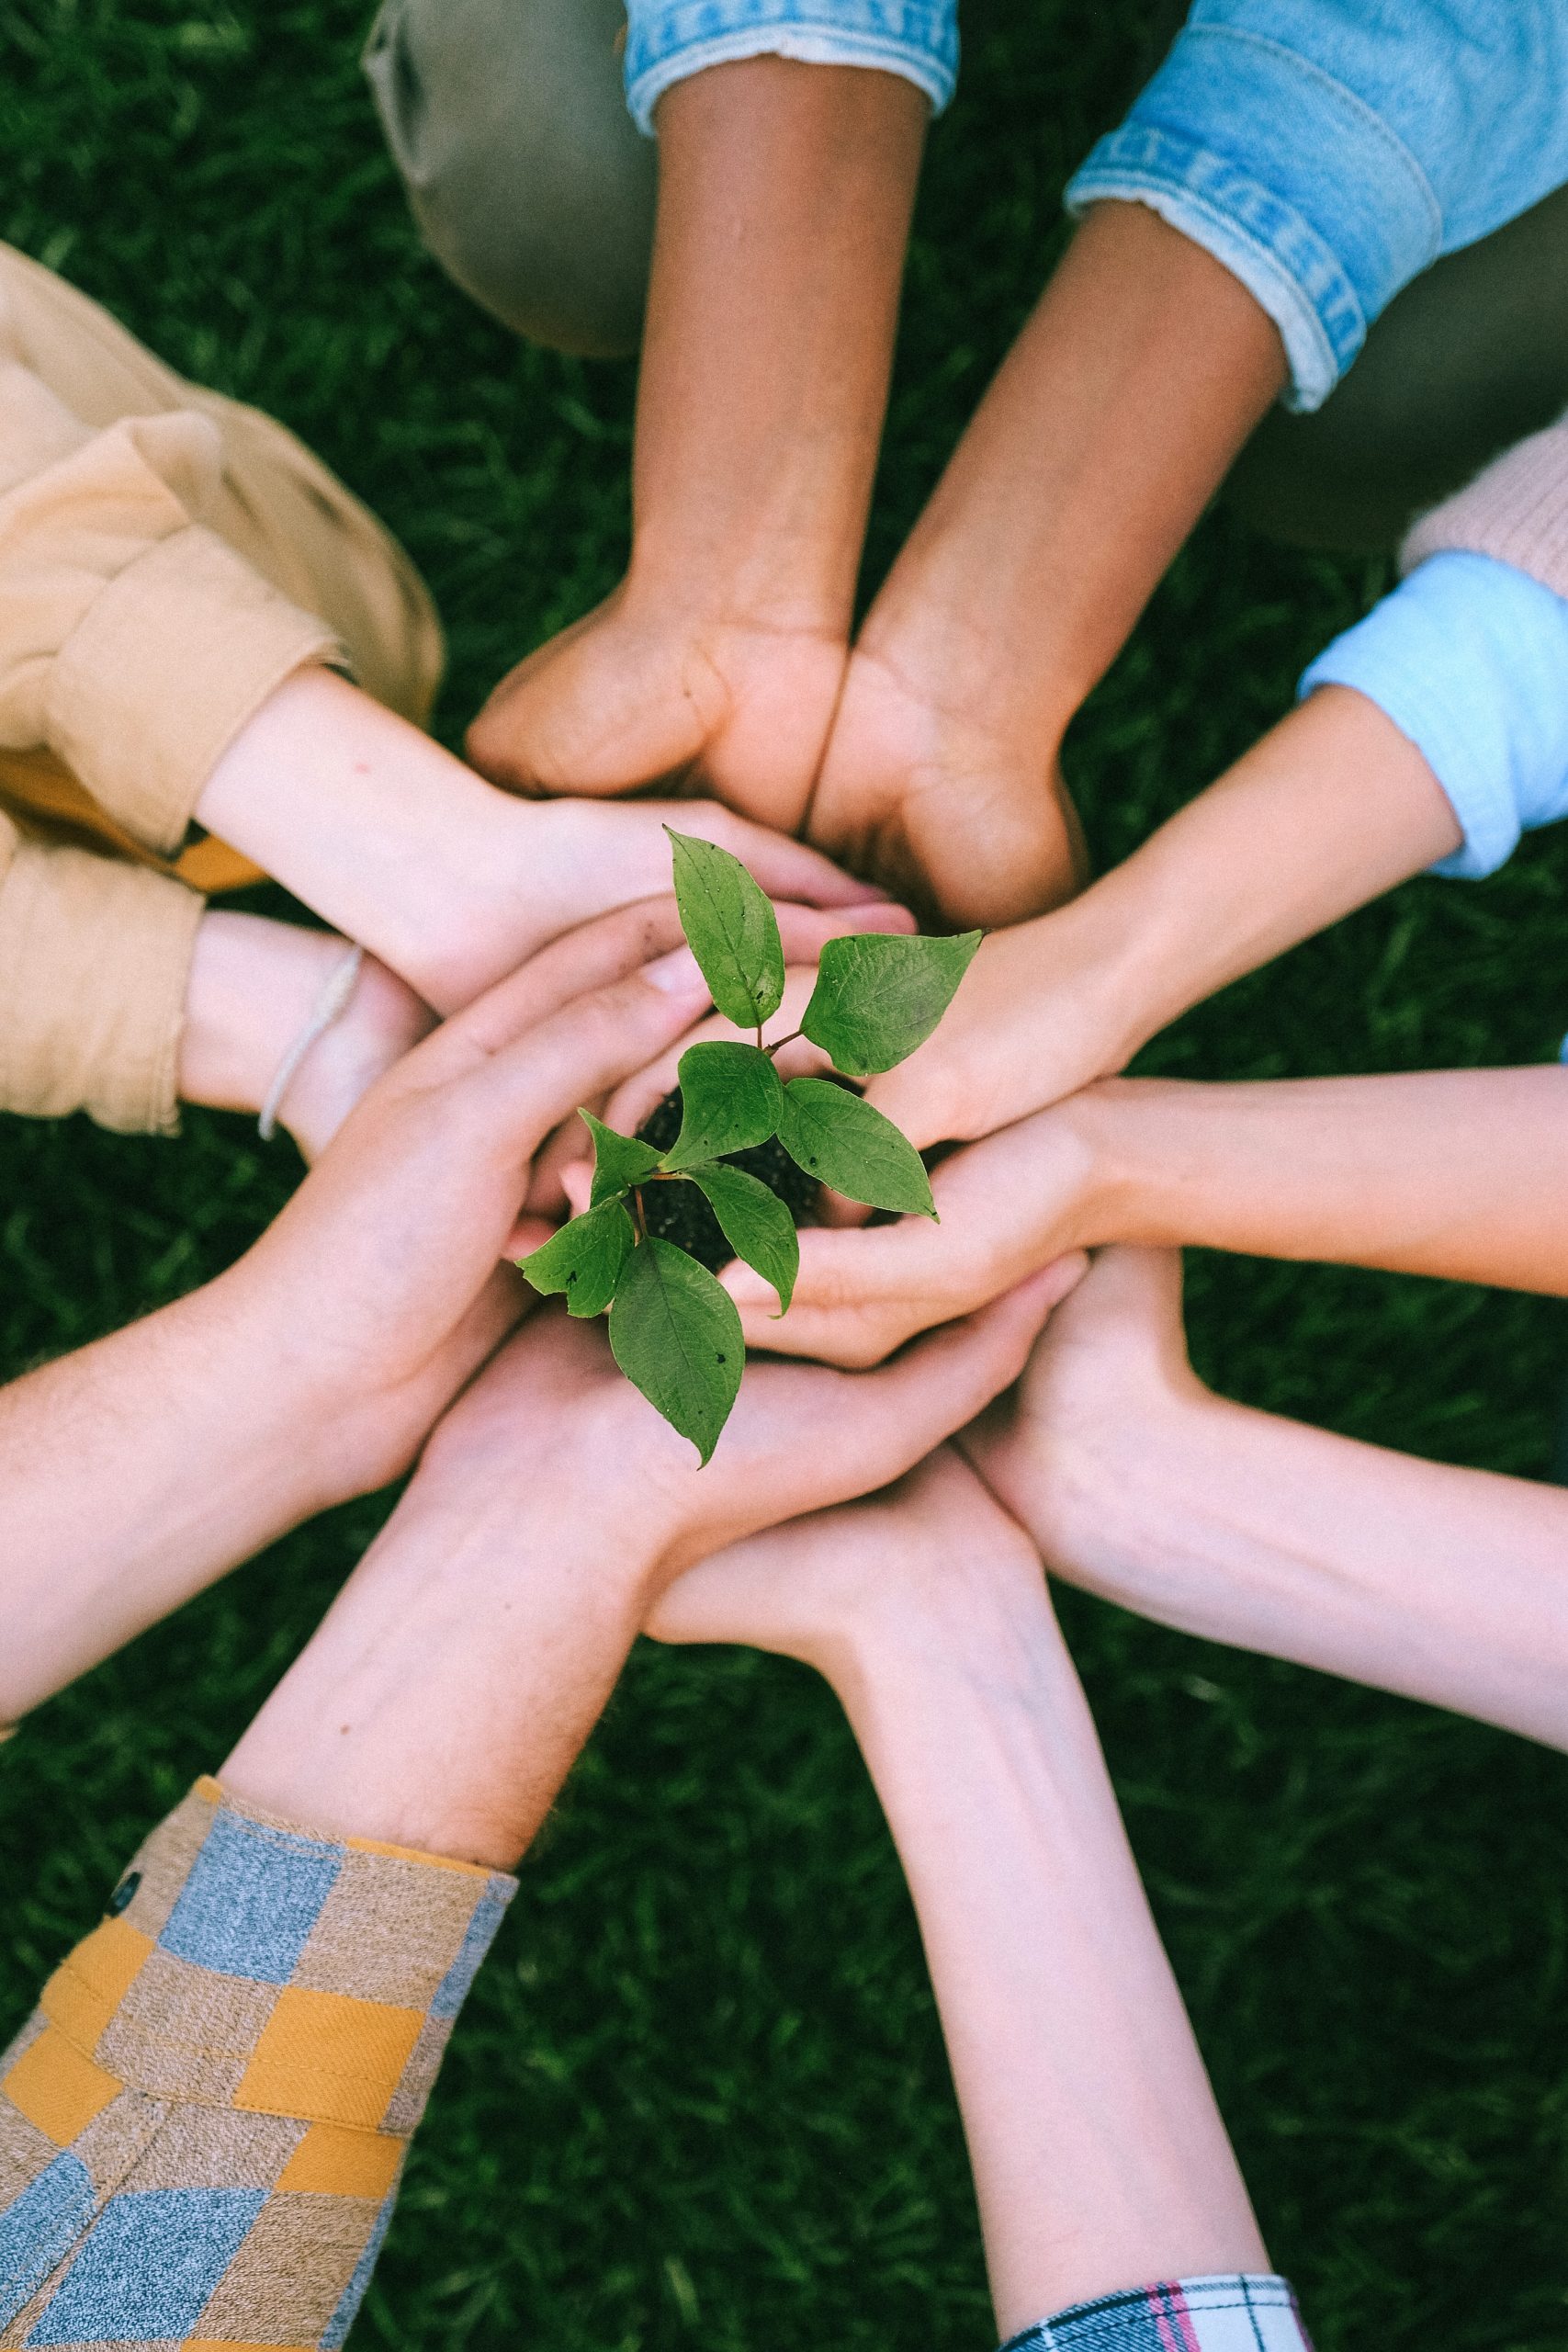 Group of hands all cupped under each other meeting in the centre of a circle, holding a small budding plant with green leaves